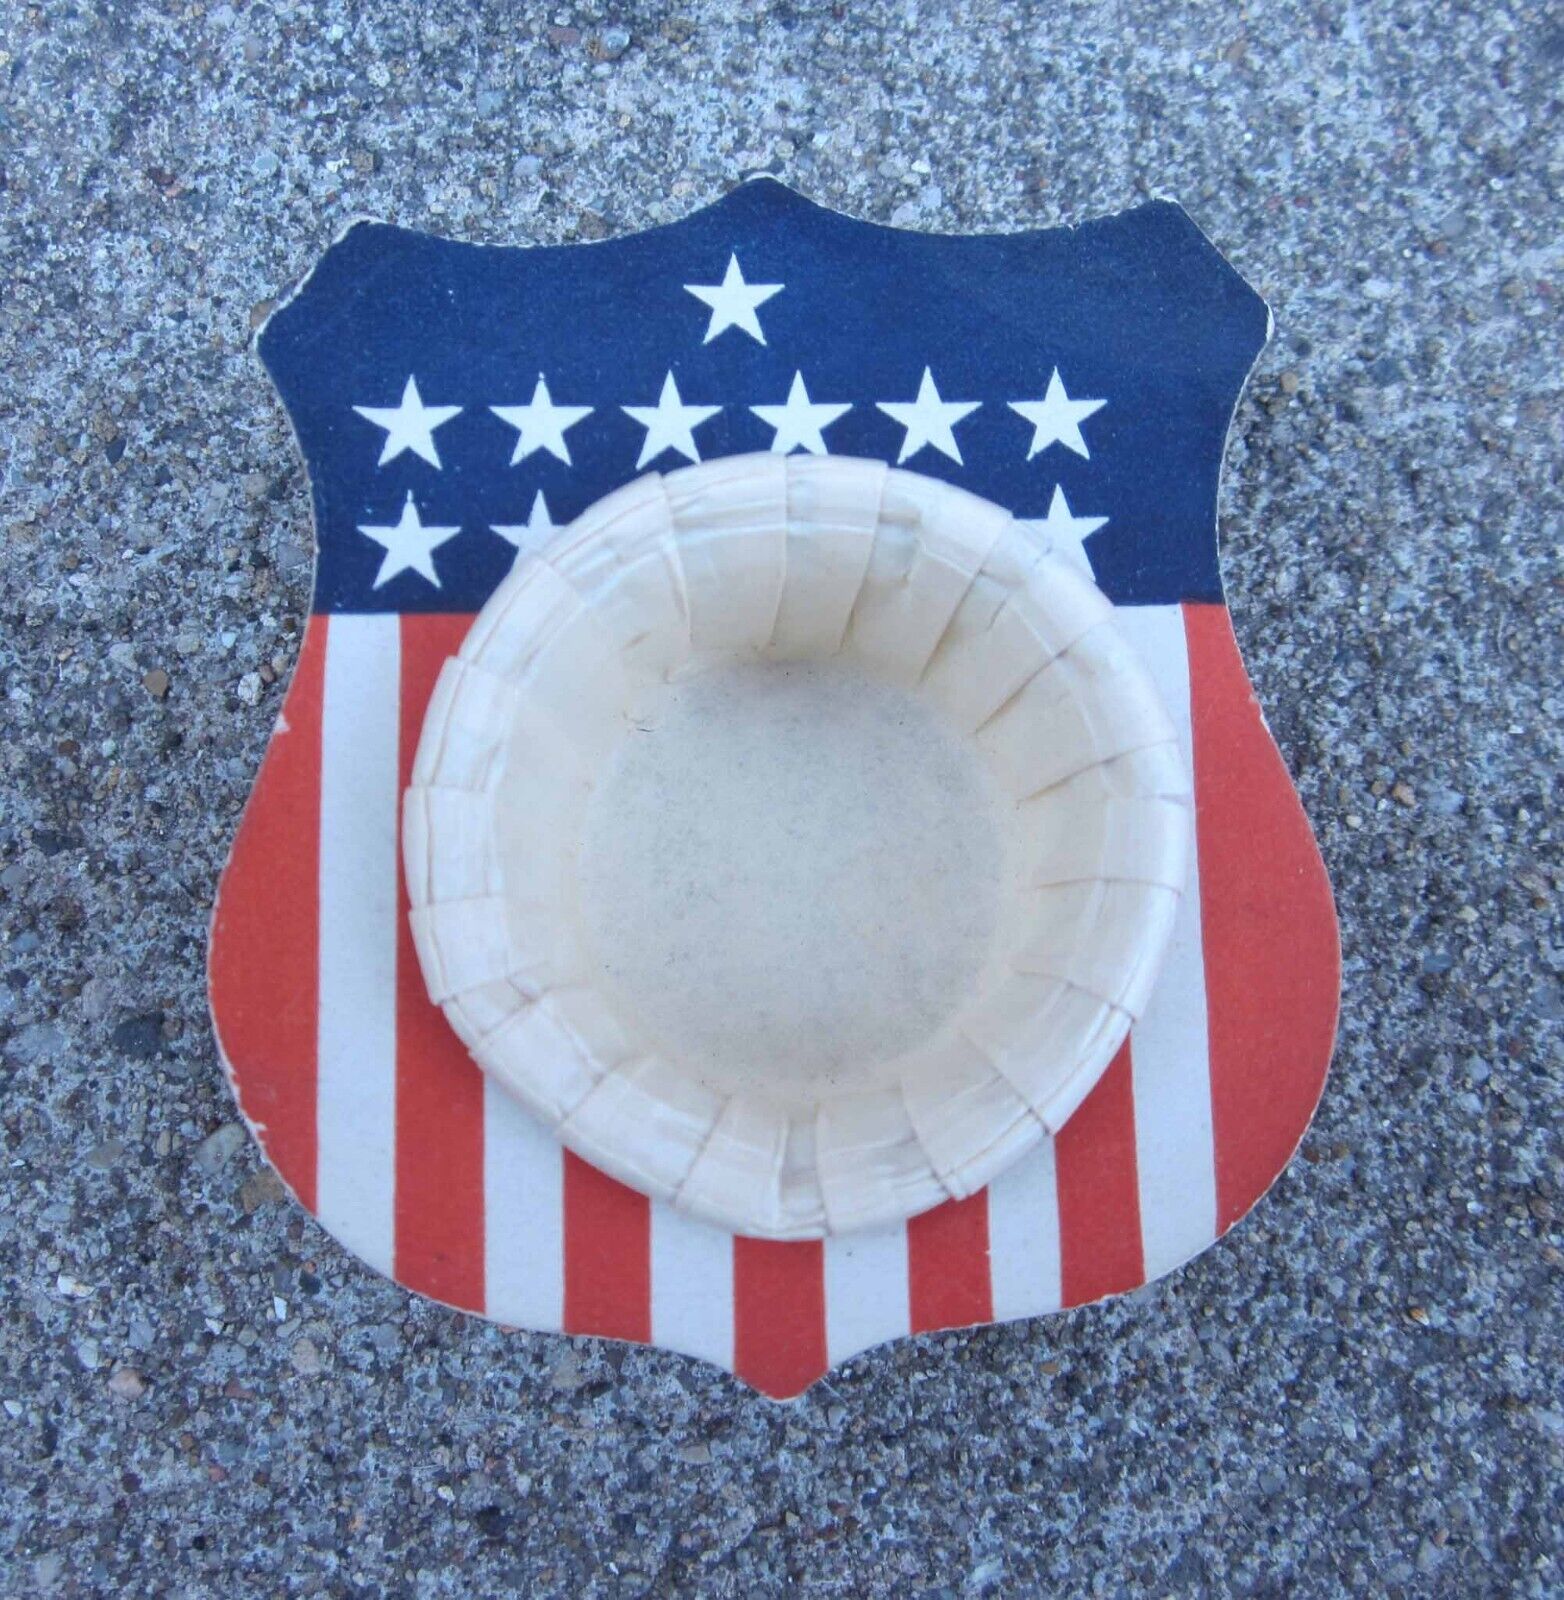 Vintage July Fourth Independence Day Patriotic RWB Shield Shape Nut Cup 1930s